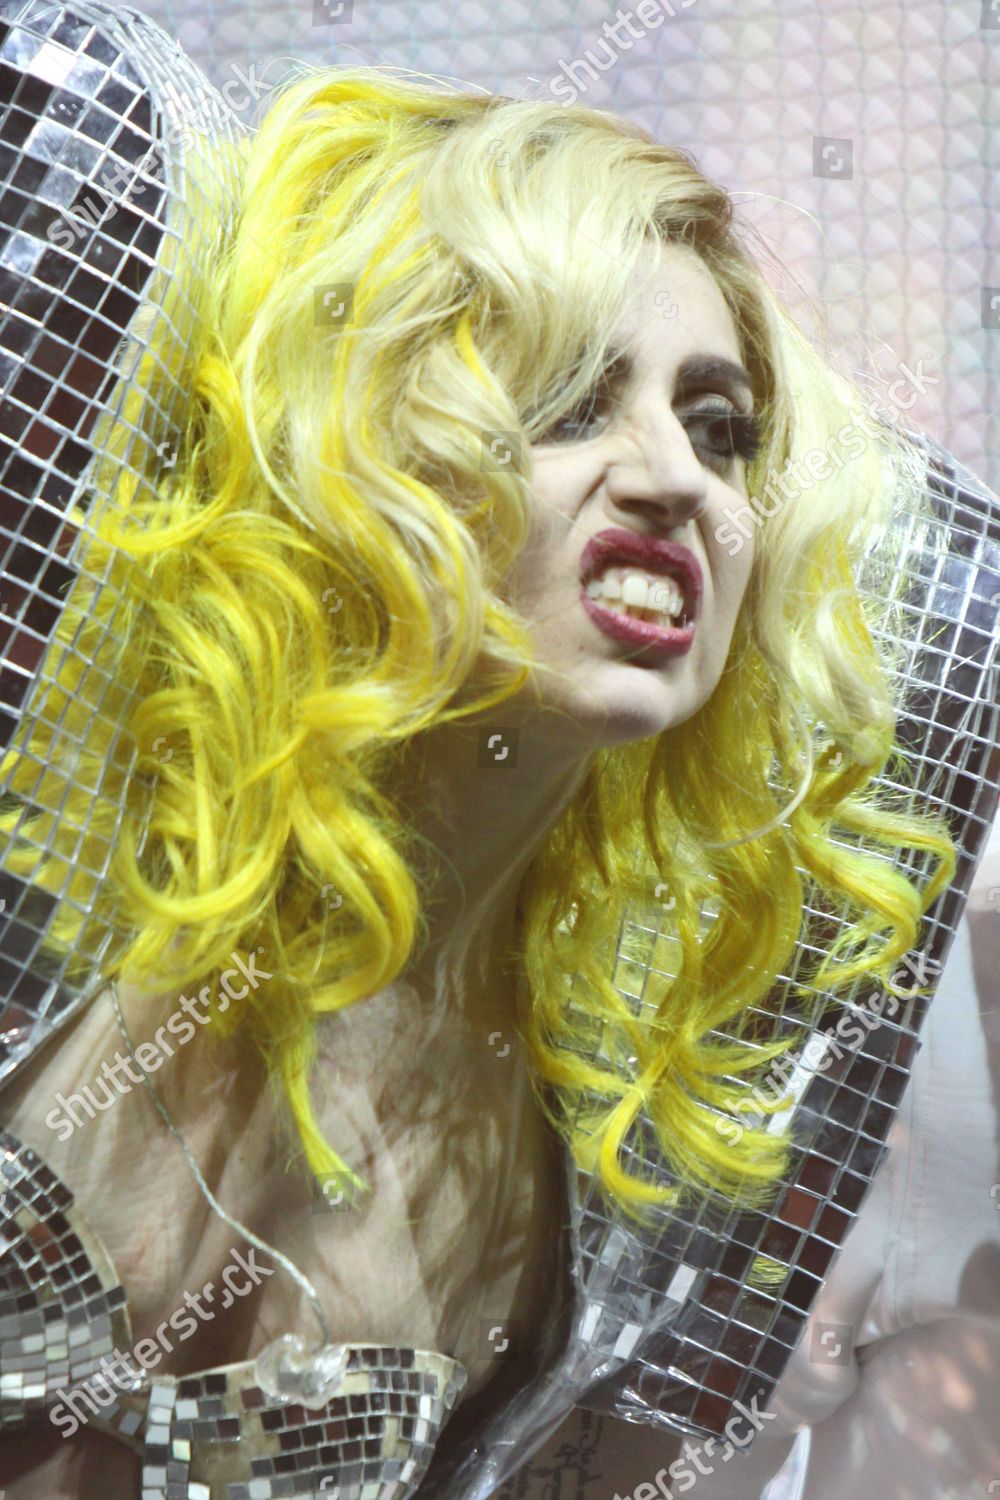 lady-gaga-in-concert-the-monster-ball-to